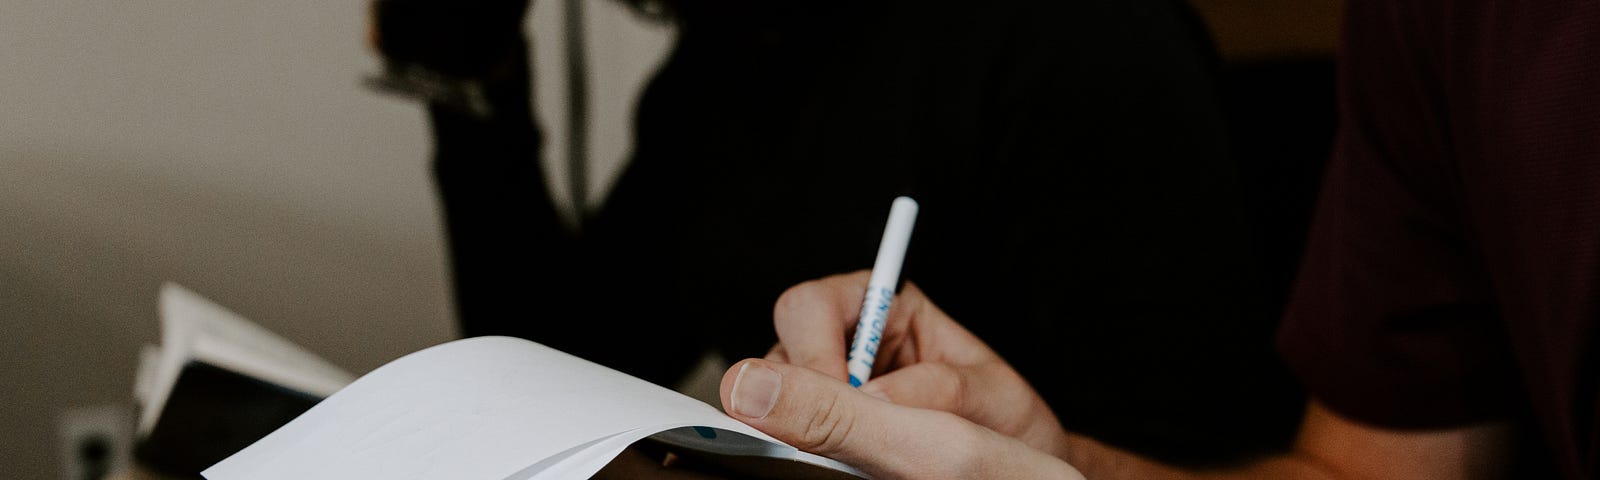 A person writing new ideas on a notepad